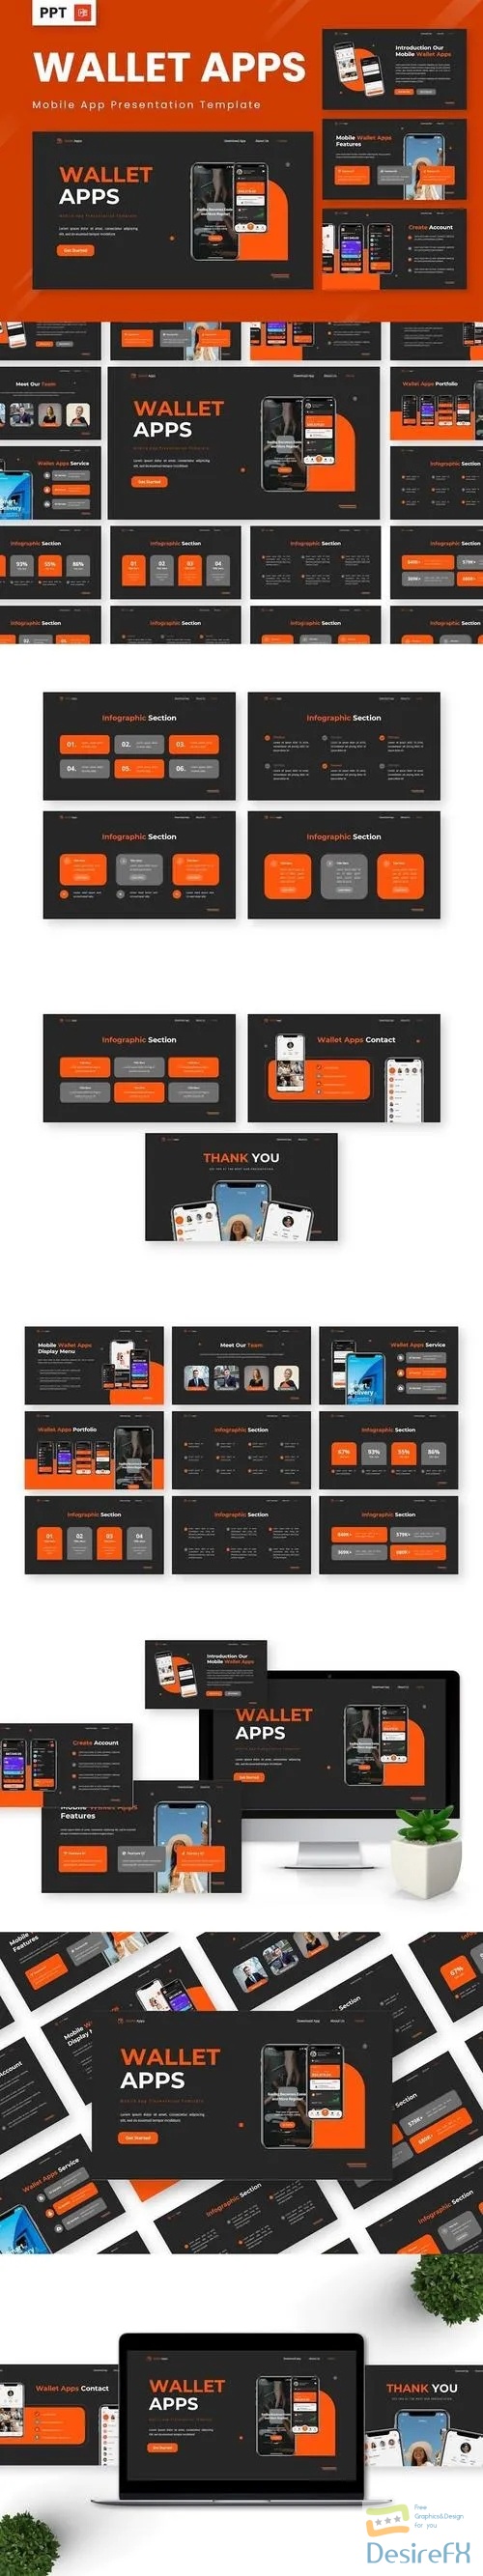 Wallet Apps - Mobile App Powerpoint Templates